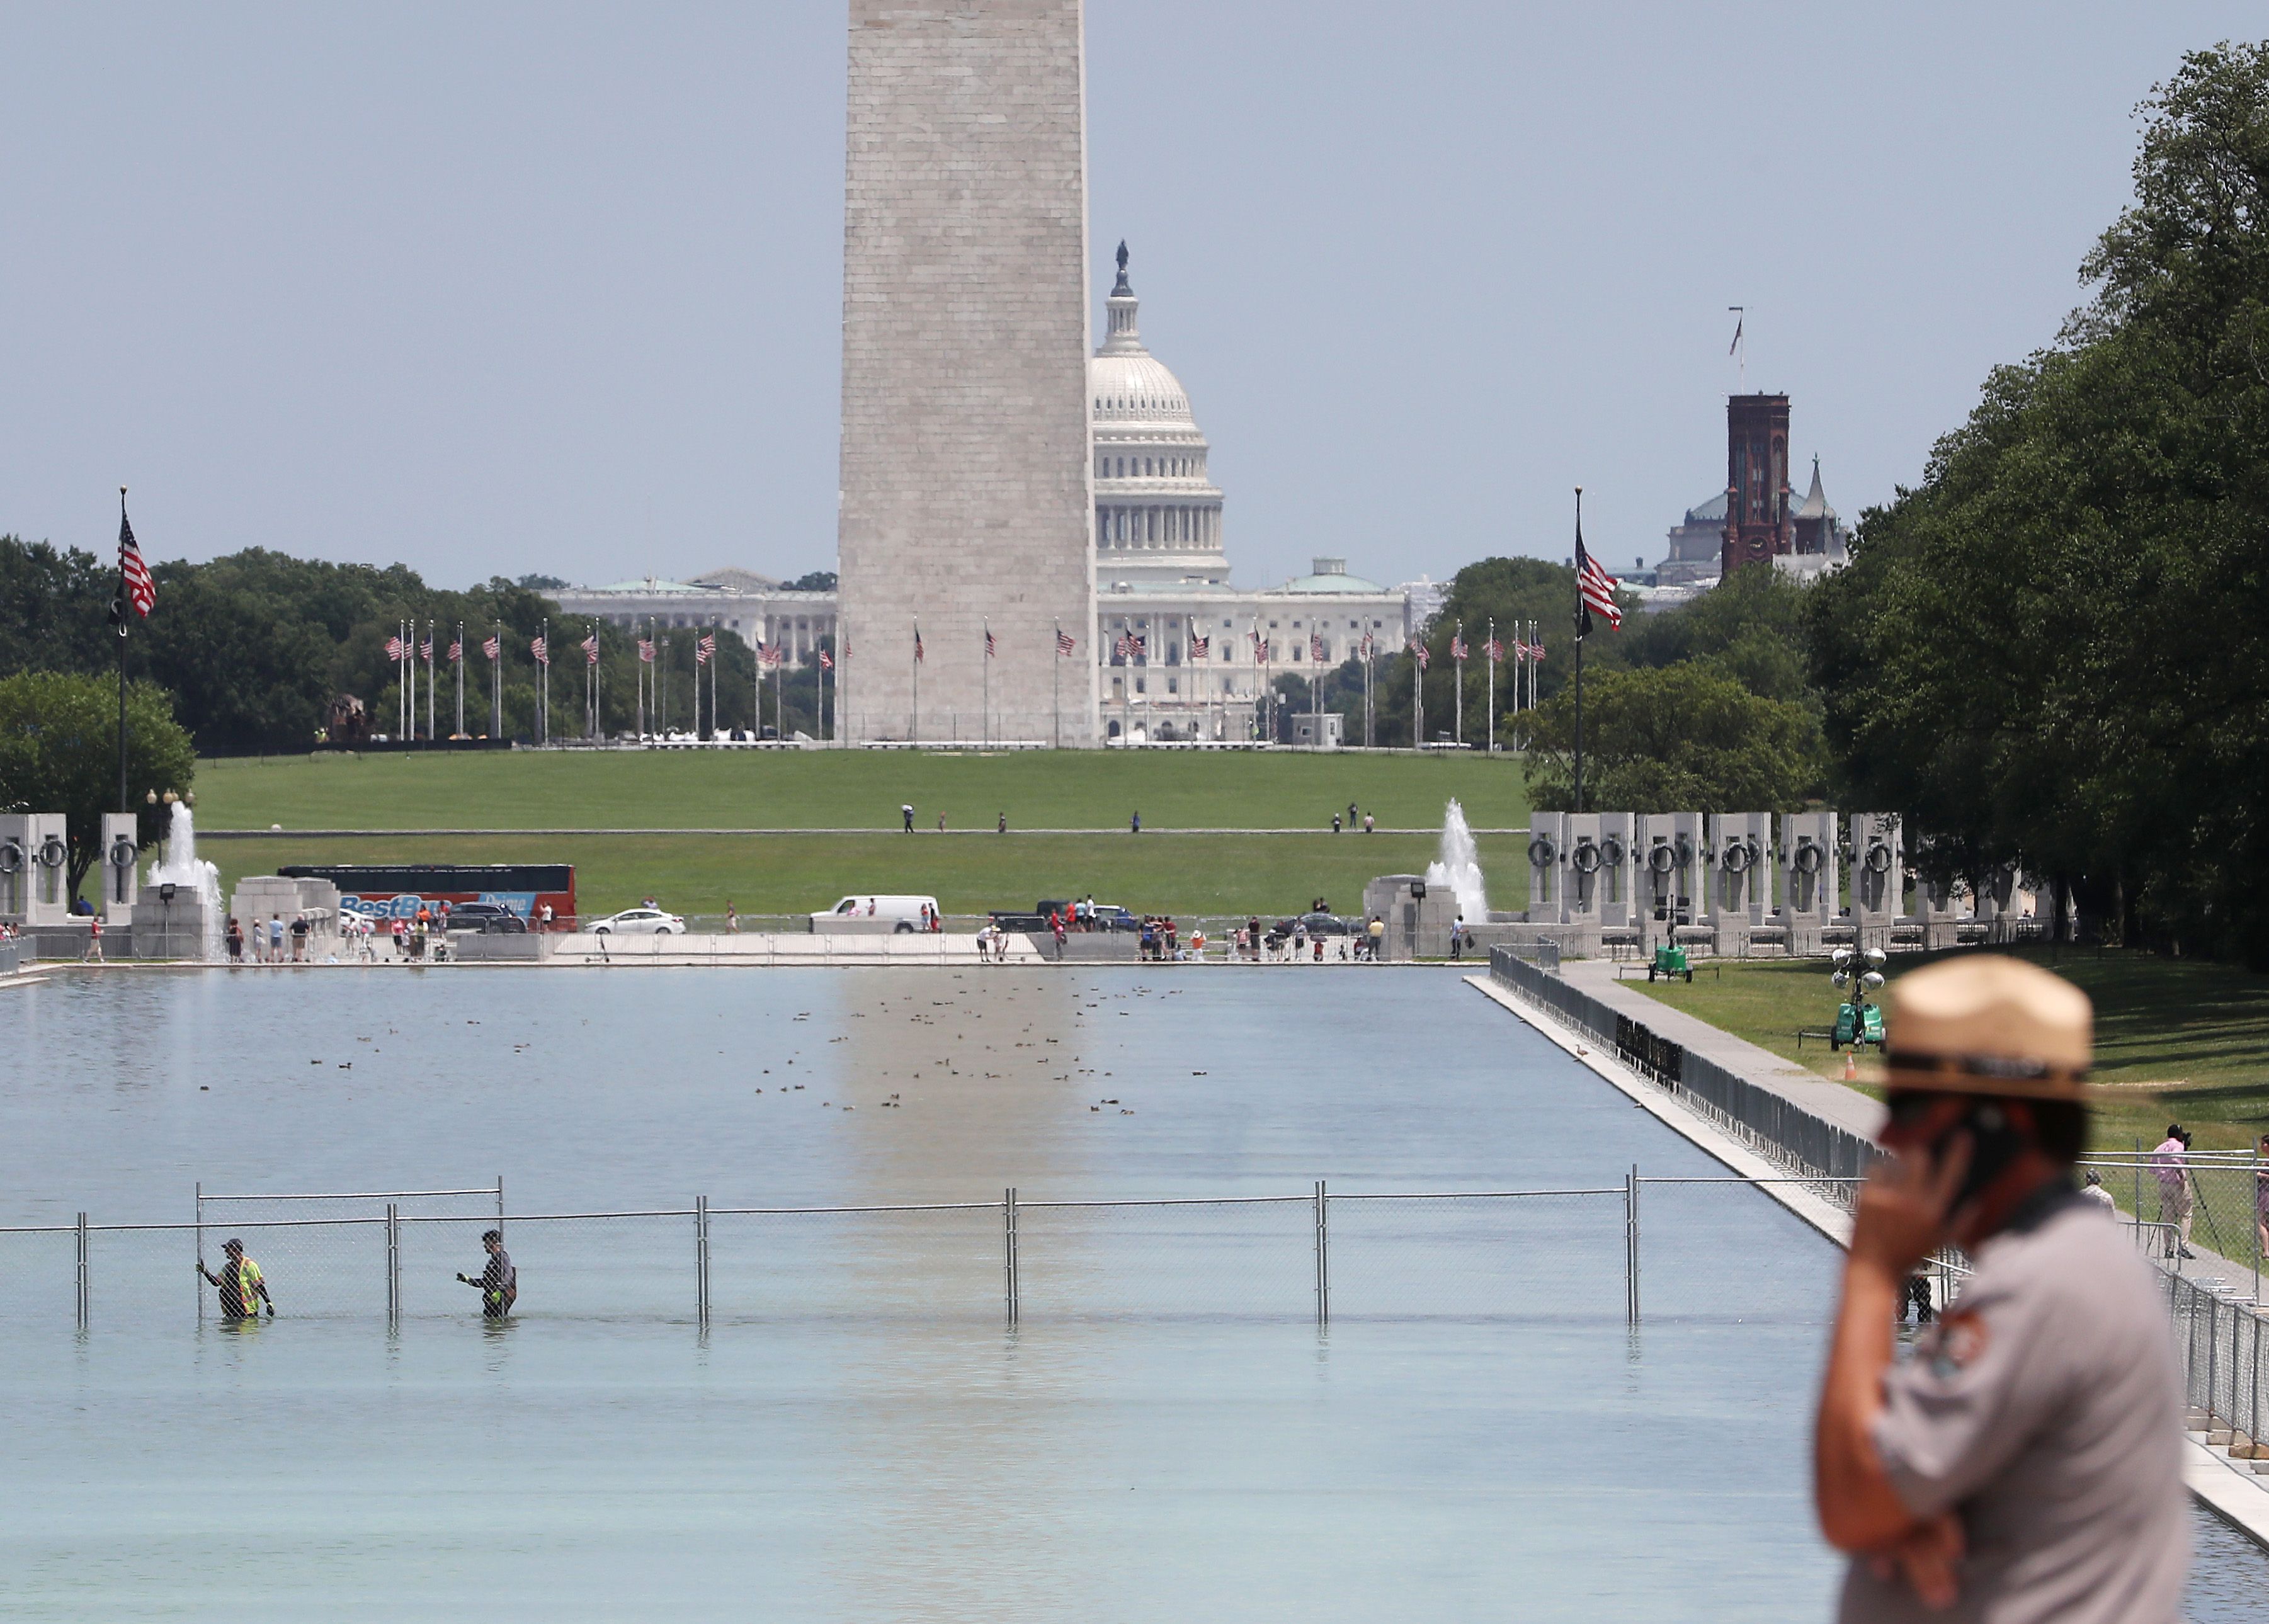 Workers install a security fence in the Reflecting Pool in front of the Lincoln Memorial ahead of the Fourth of July "Salute to America" celebration.